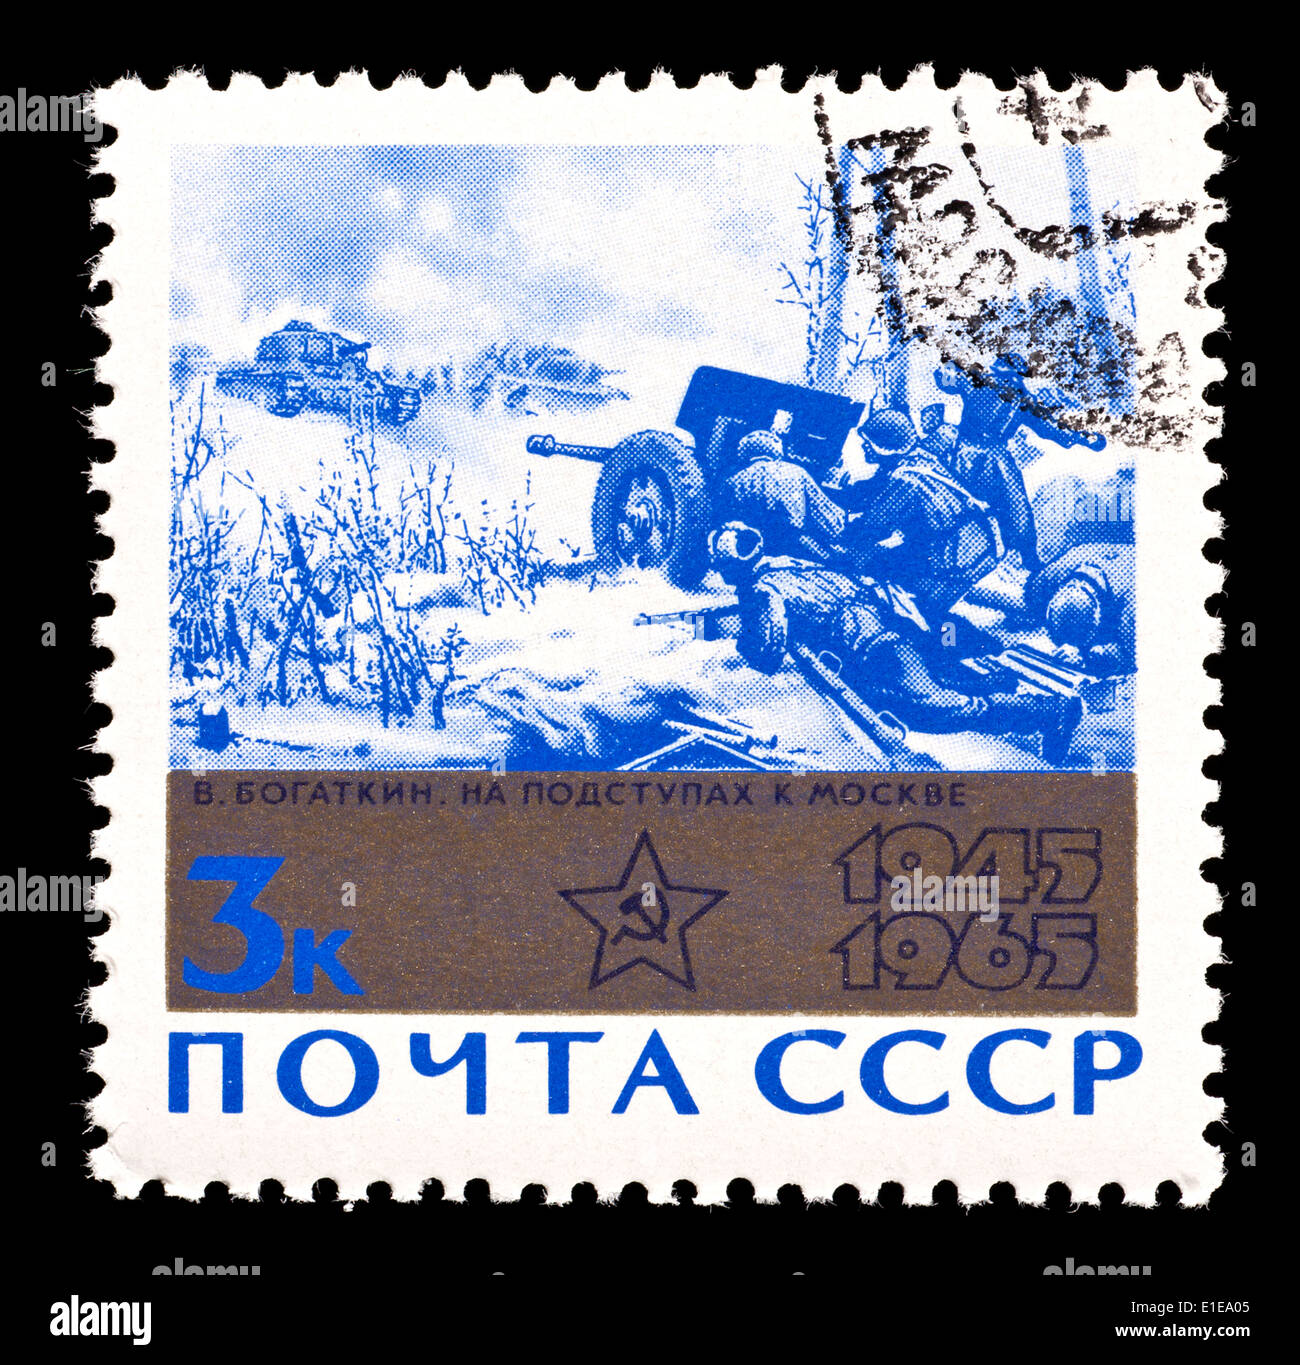 Postage stamp from the Soviet Union depicting V. Bogatkin illustration 'Attack on Moscow' Stock Photo